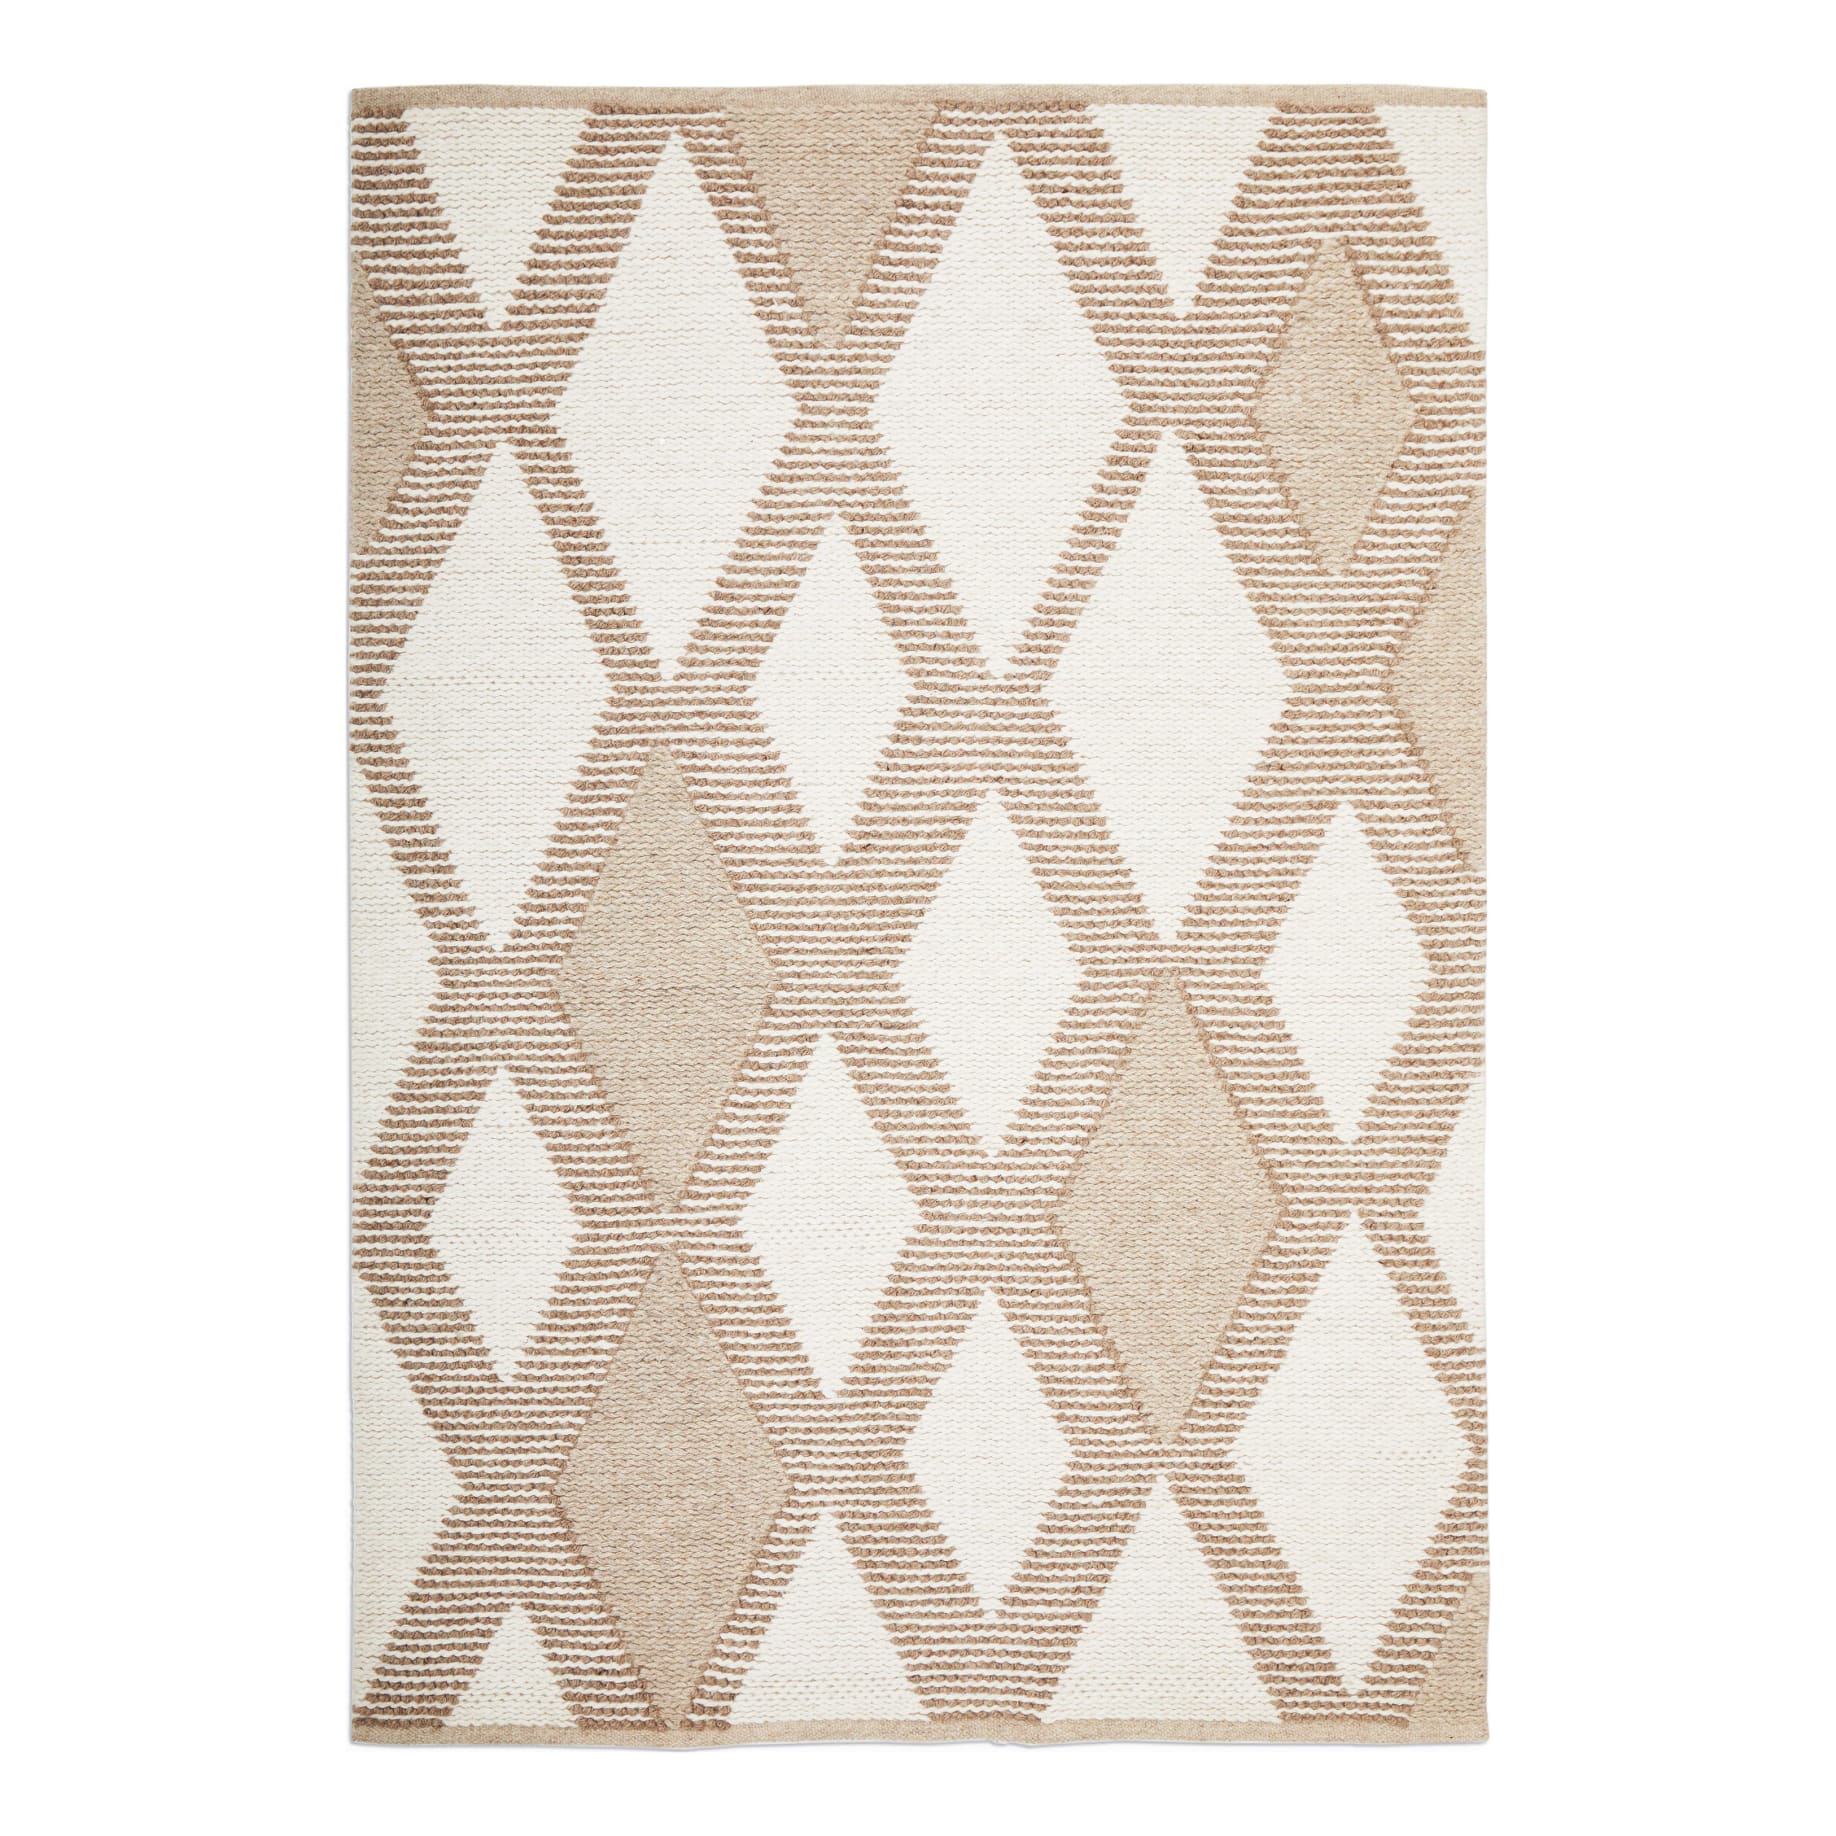 Avalon Shelly Rug 230x320cm in Natural